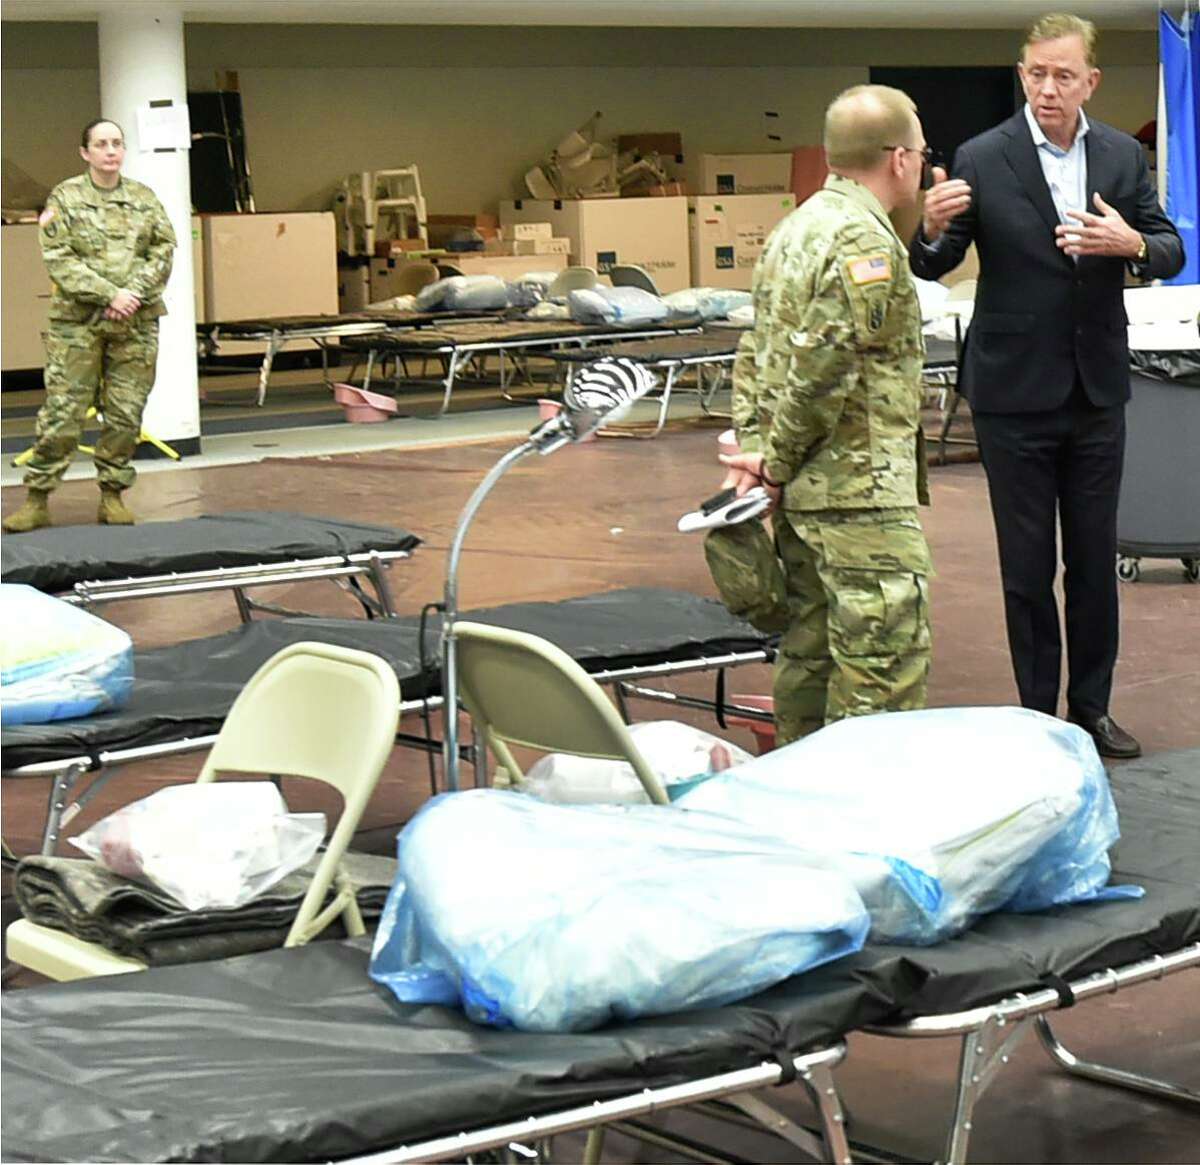 Connecticut Governor Ned Lamont, right, speaks with U.S. Army Major General Francis Evon, the Connecticut National Guard Adjutant General as he tours a Federal Emergency Management Agency 250-bed medical field hospital in April.